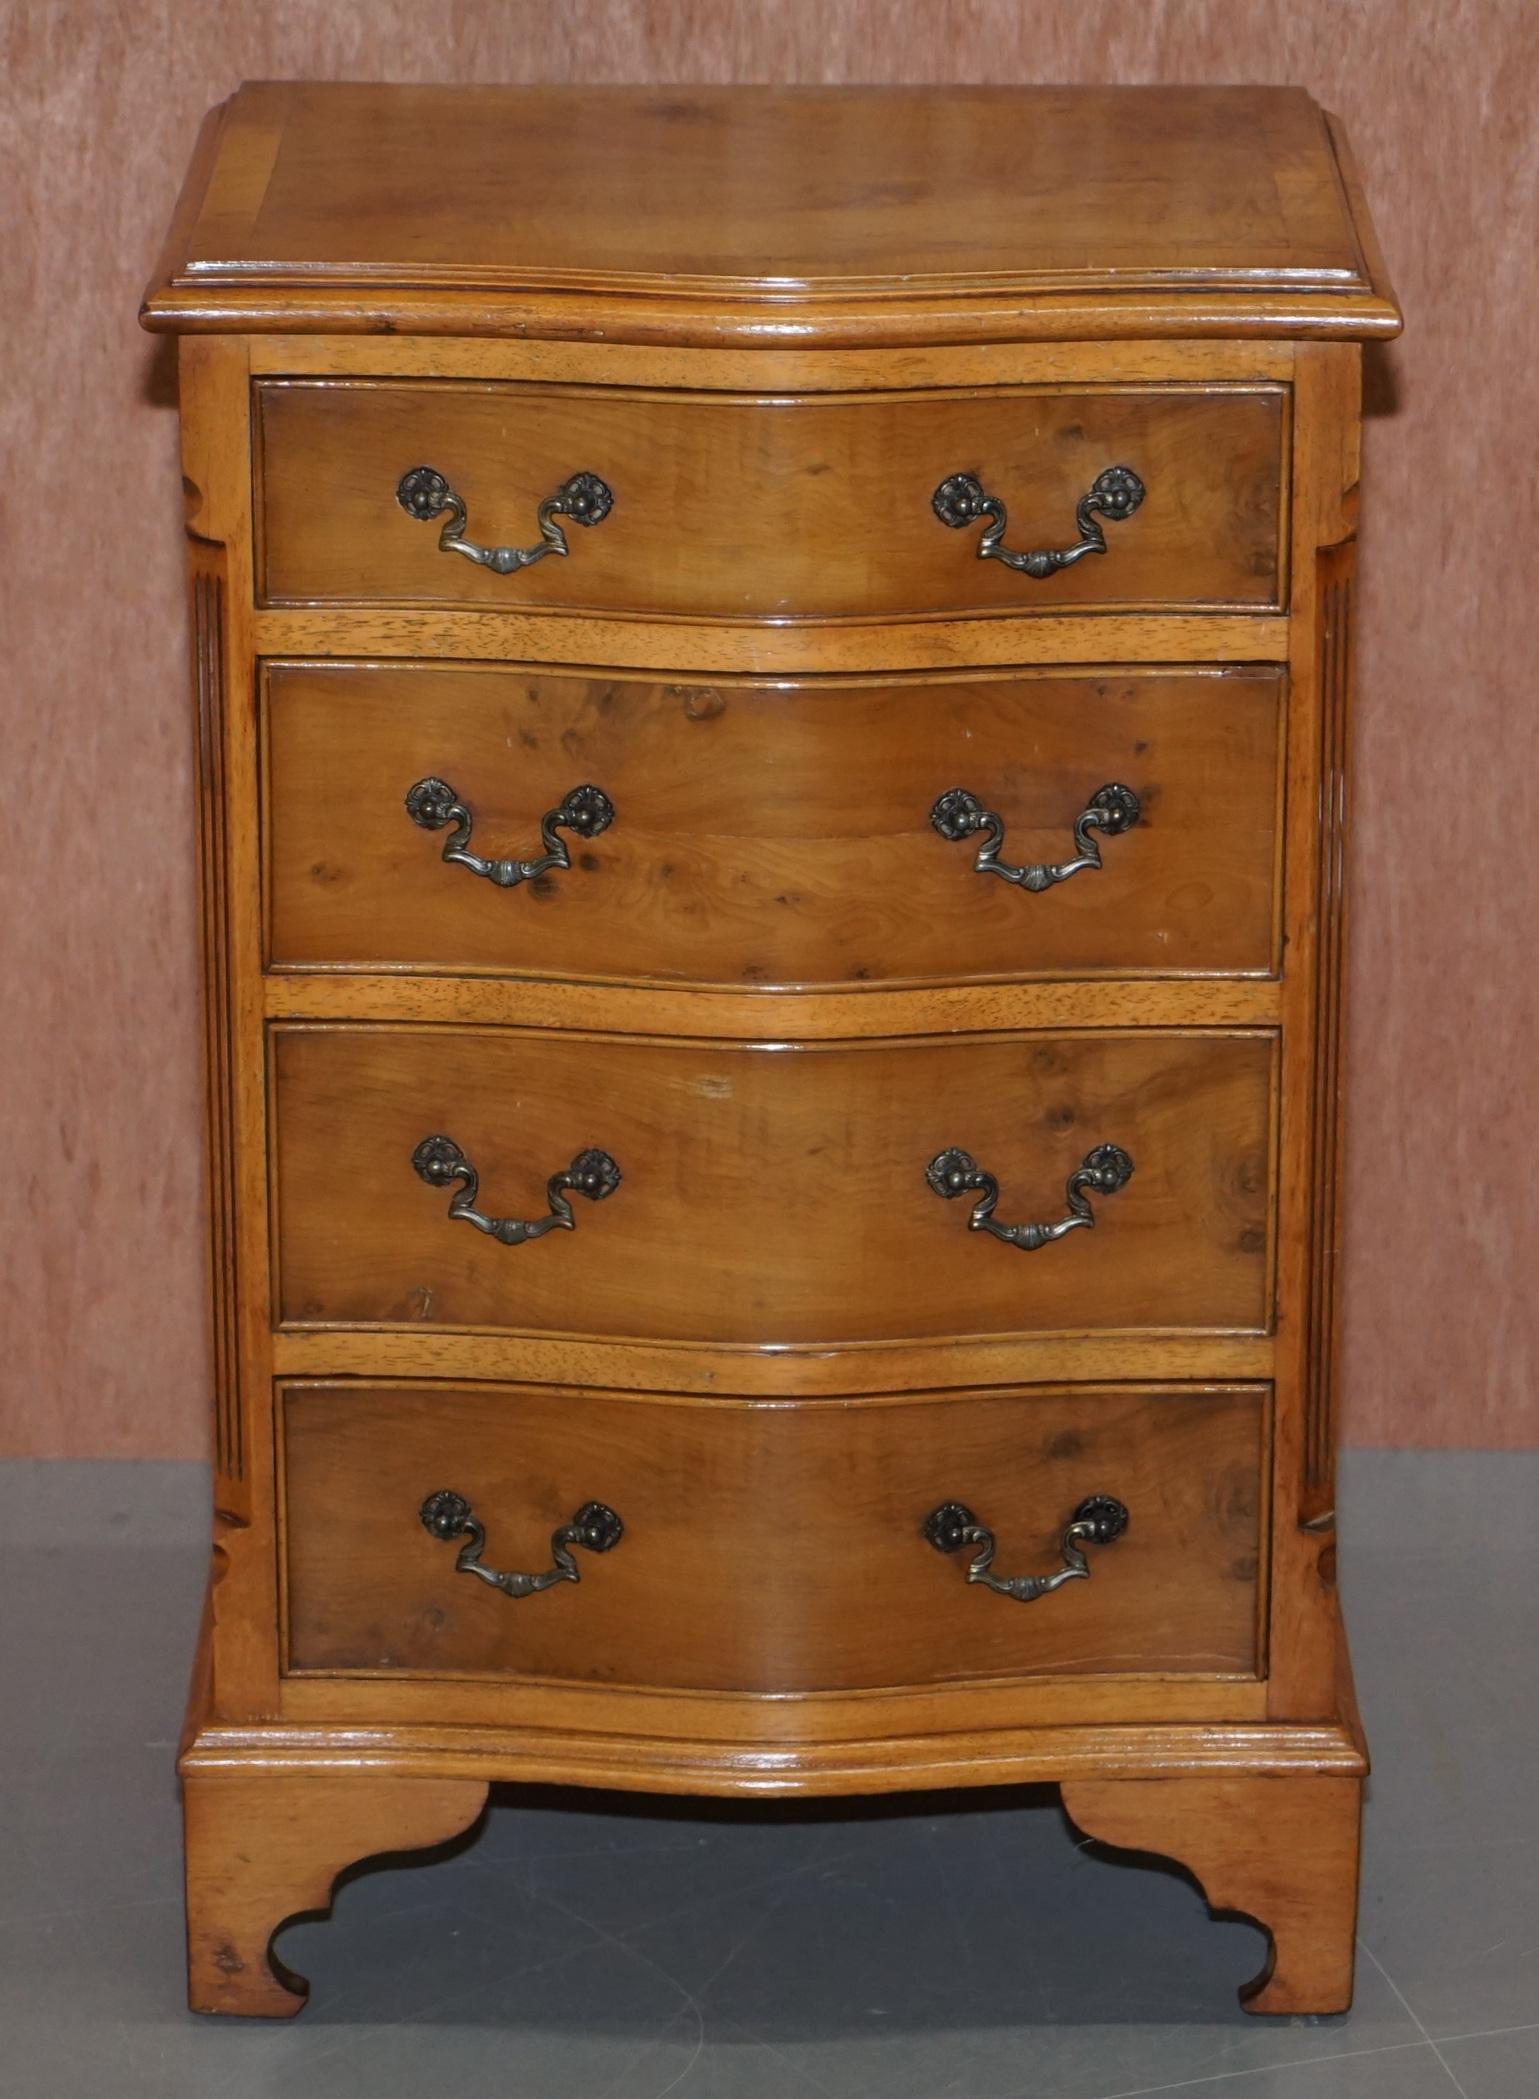 We are delighted to offer for sale this very nice vintage burr walnut side table sized chest of drawers made in the Georgian style

A good looking and well made piece, its very versatile, I see it being used as a luxury lamp or wine table but